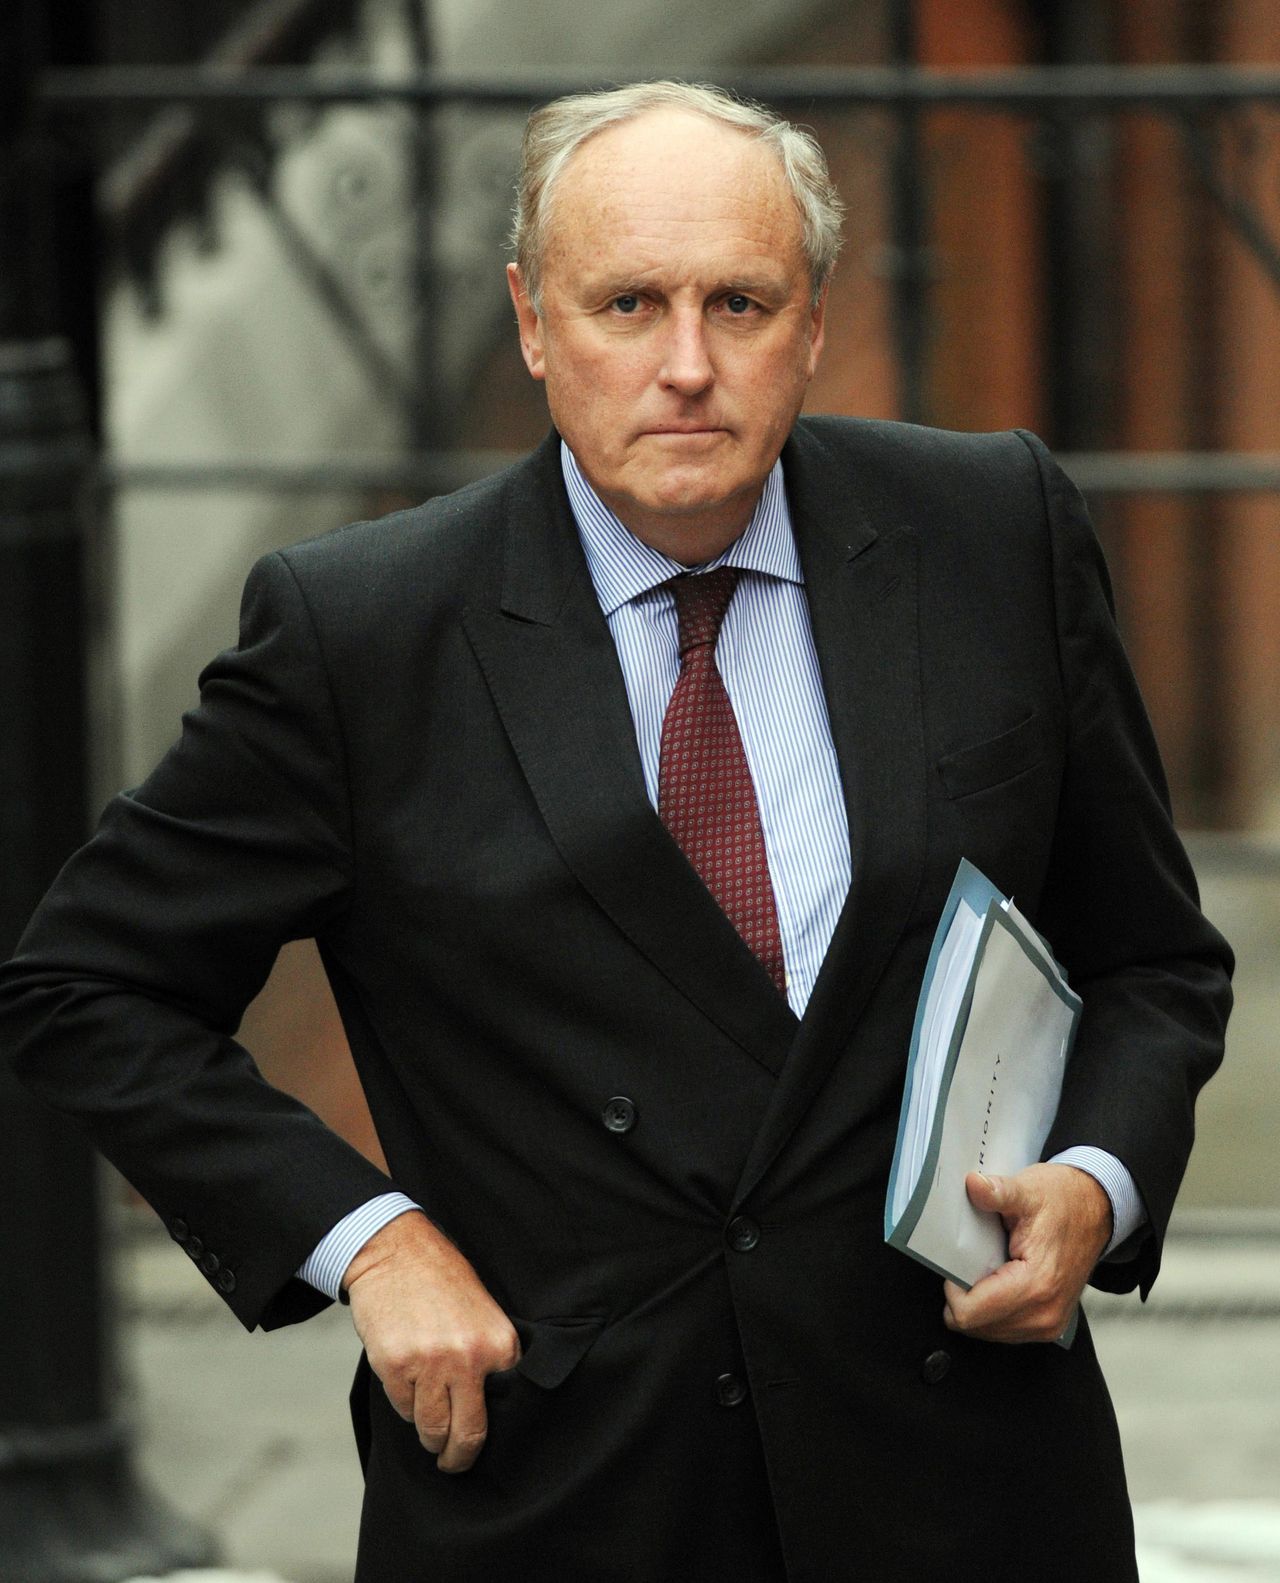 Daily Mail editor Paul Dacre arrives at the Leveson inquiry into press standards in 2012